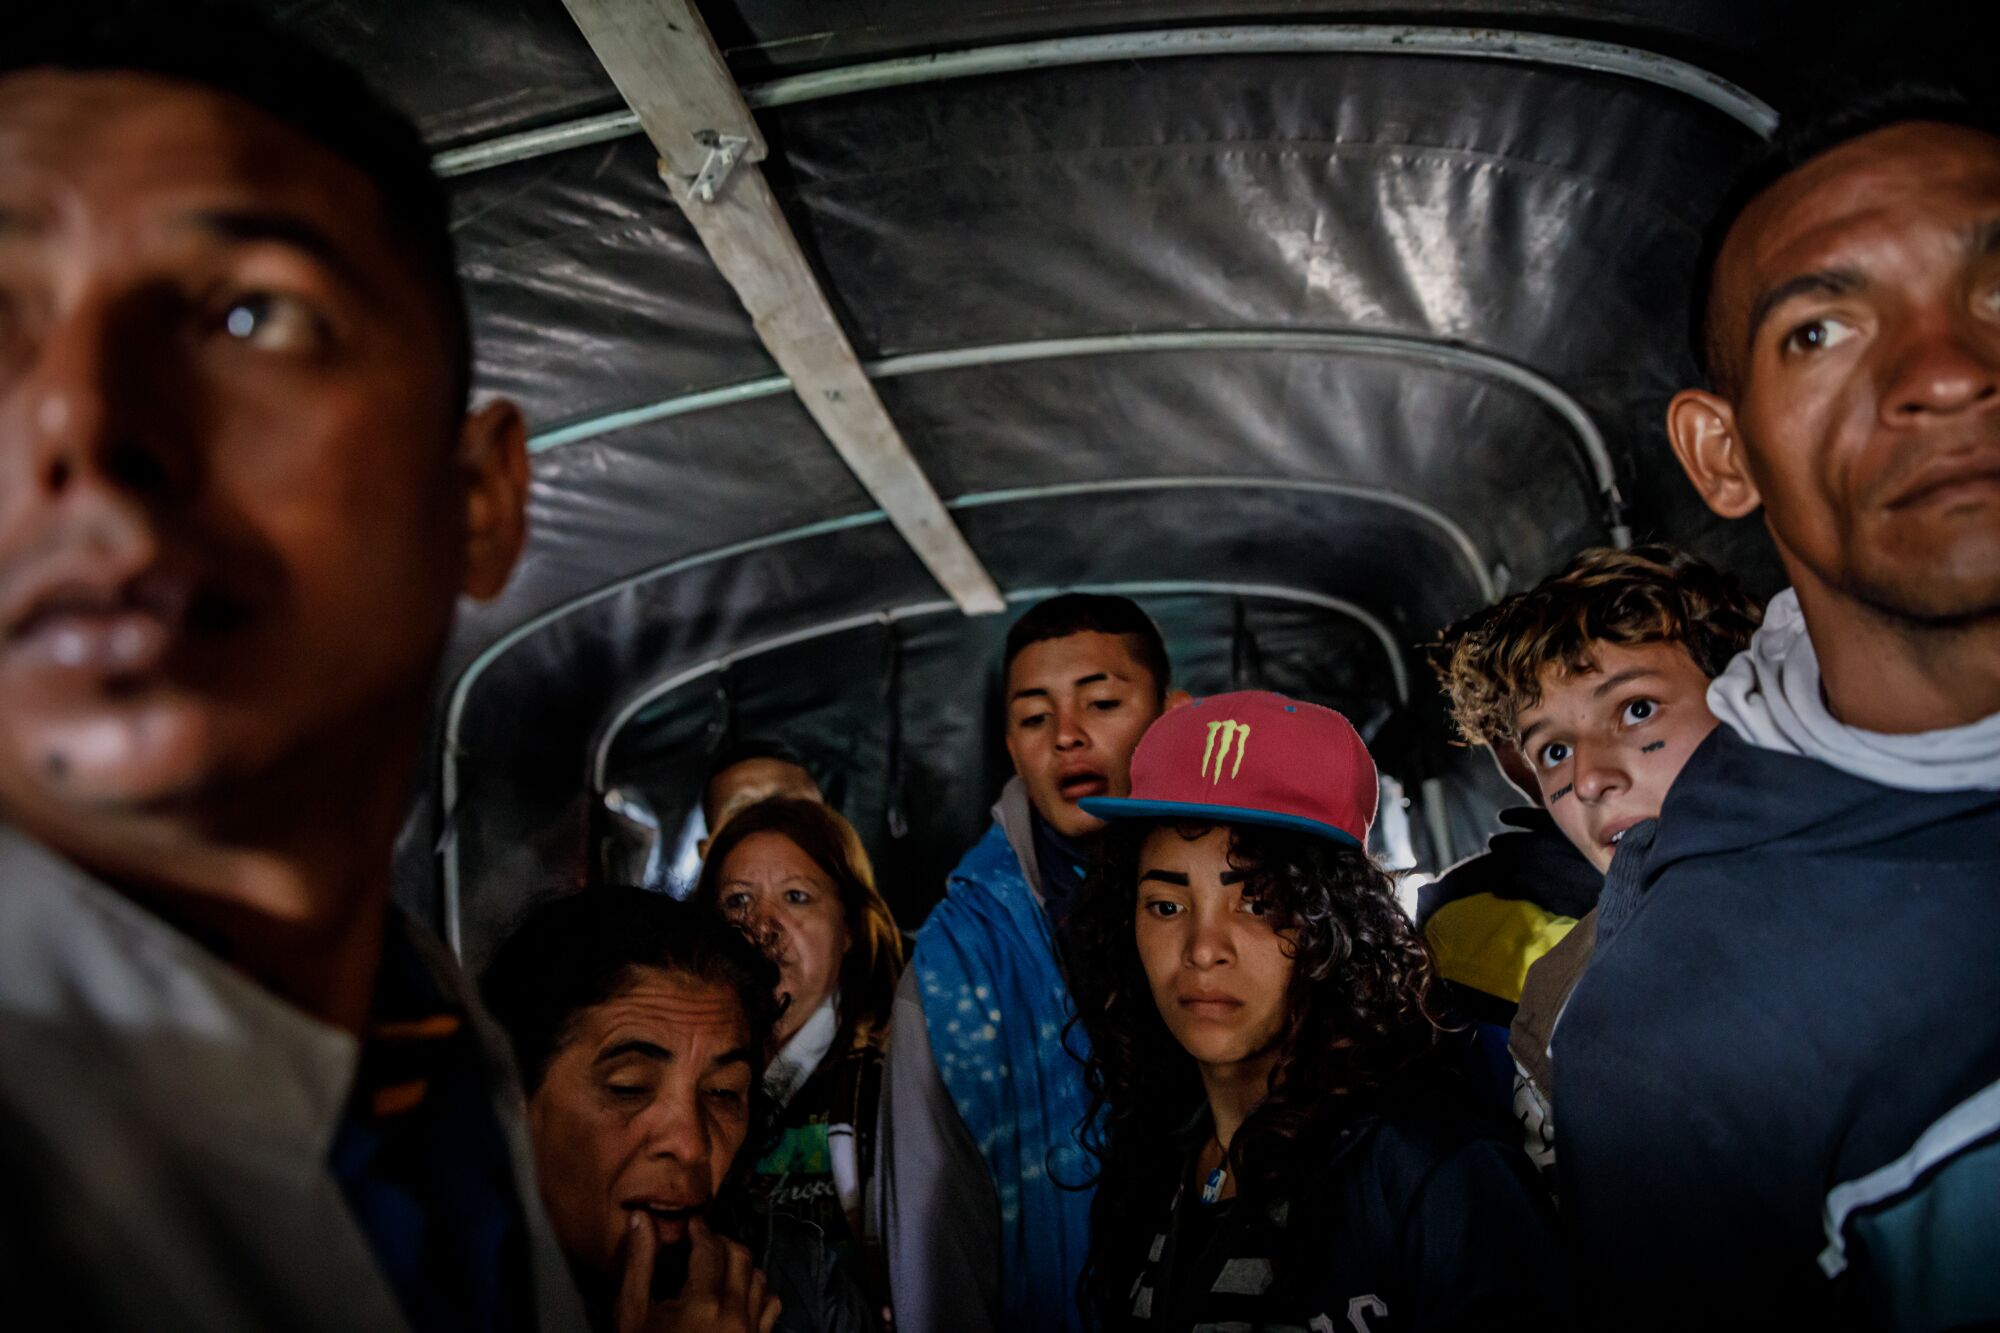 Venezuelan migrants look on as a truck drive closes the tarp to cover the rear to avoid getting caught. The truck is ferrying across the cold plateau, known as El Páramo de Berlín – the most dangerous part of the Andes to get to the other side, towards Bucaramanga, Colombia.